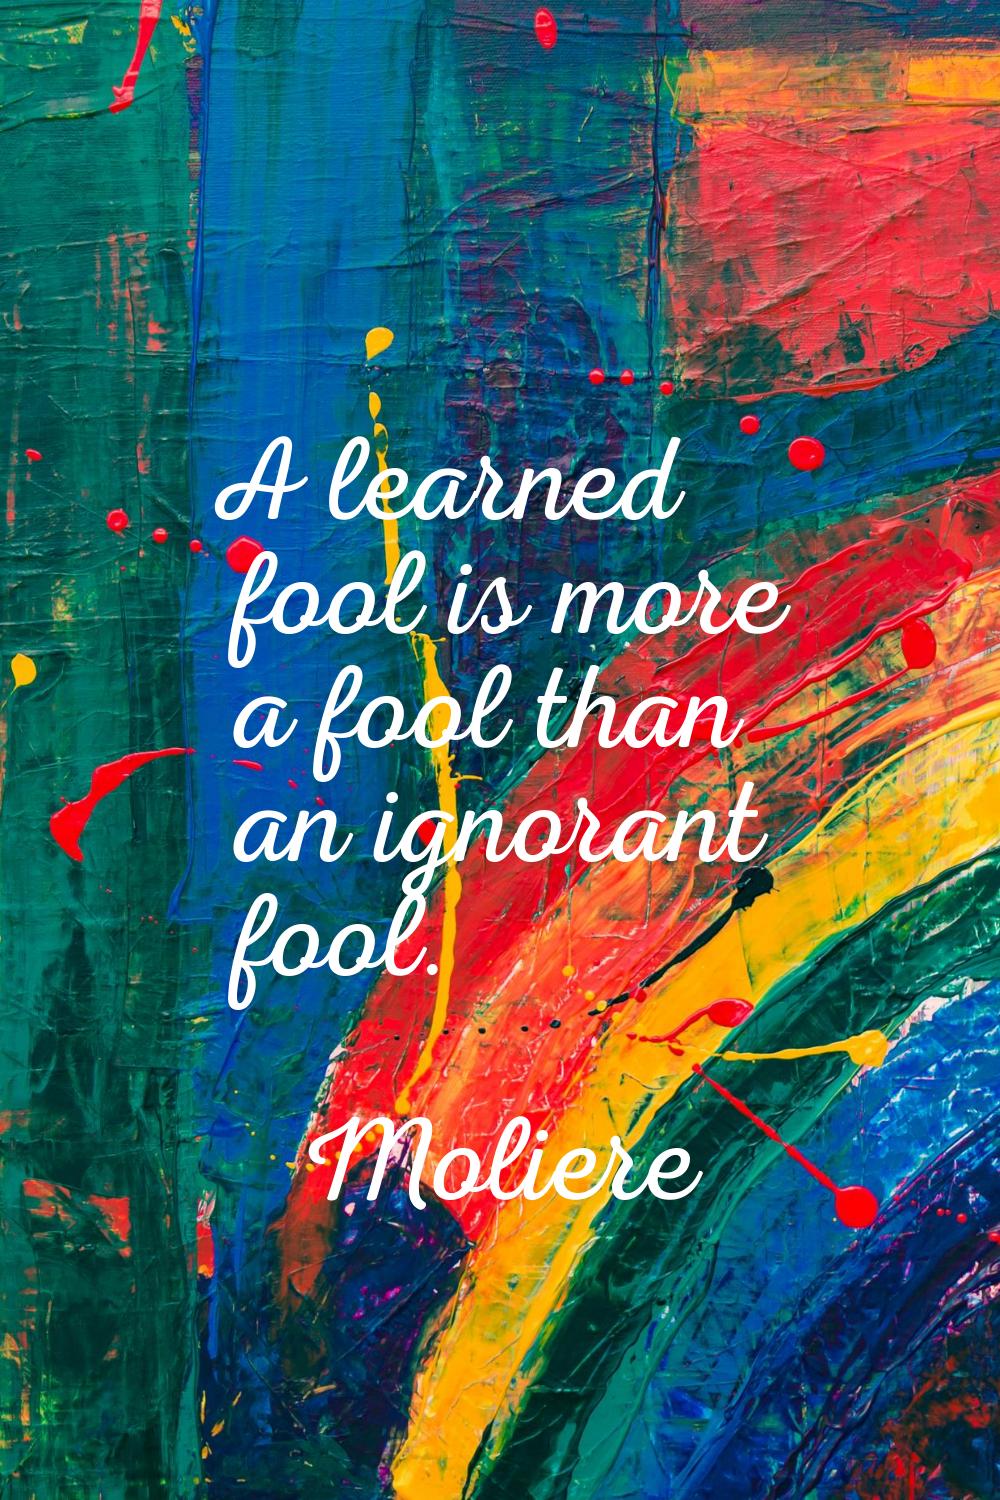 A learned fool is more a fool than an ignorant fool.